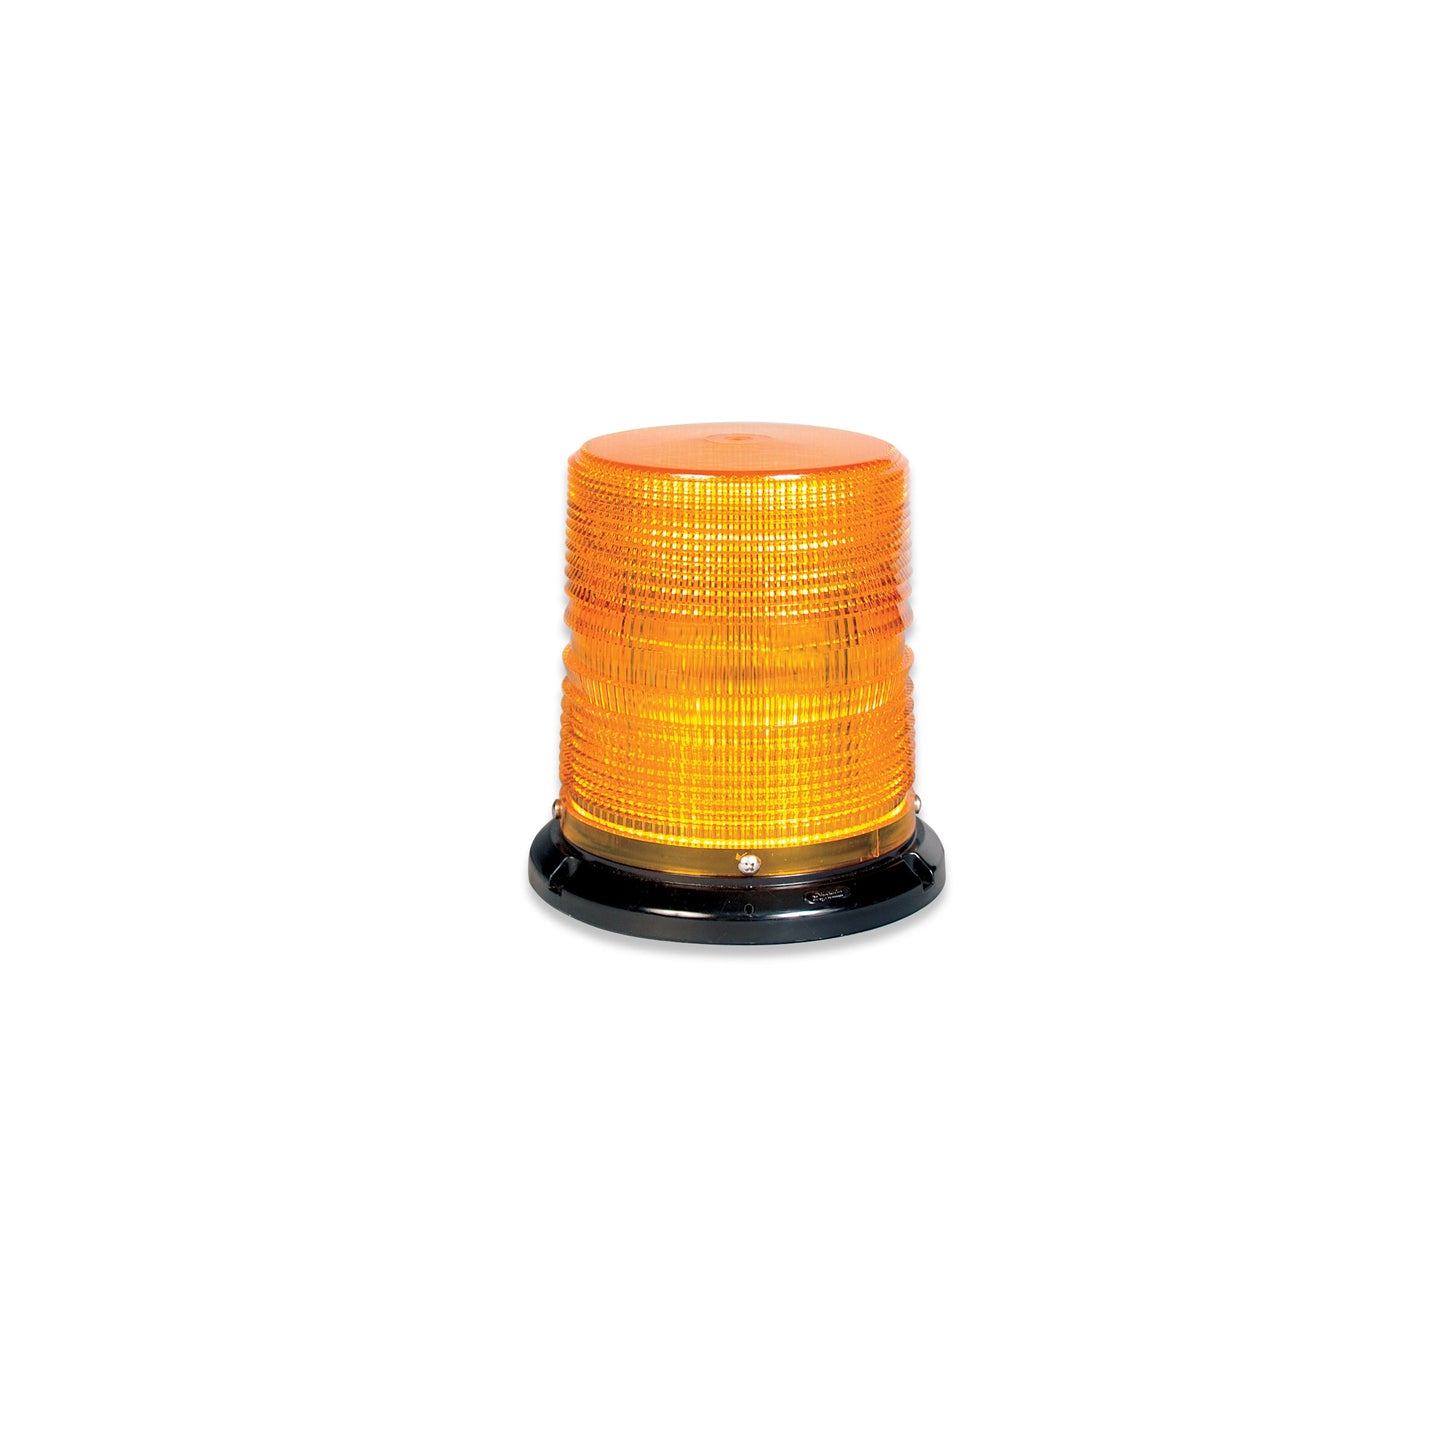 Soundoff Signal ELB45BML+FC 4500 Series Led Beacon, 10-30V, Sae J845 Class 1 - Magnetic Mount, 4" Clear Dome/ Amber & White Leds